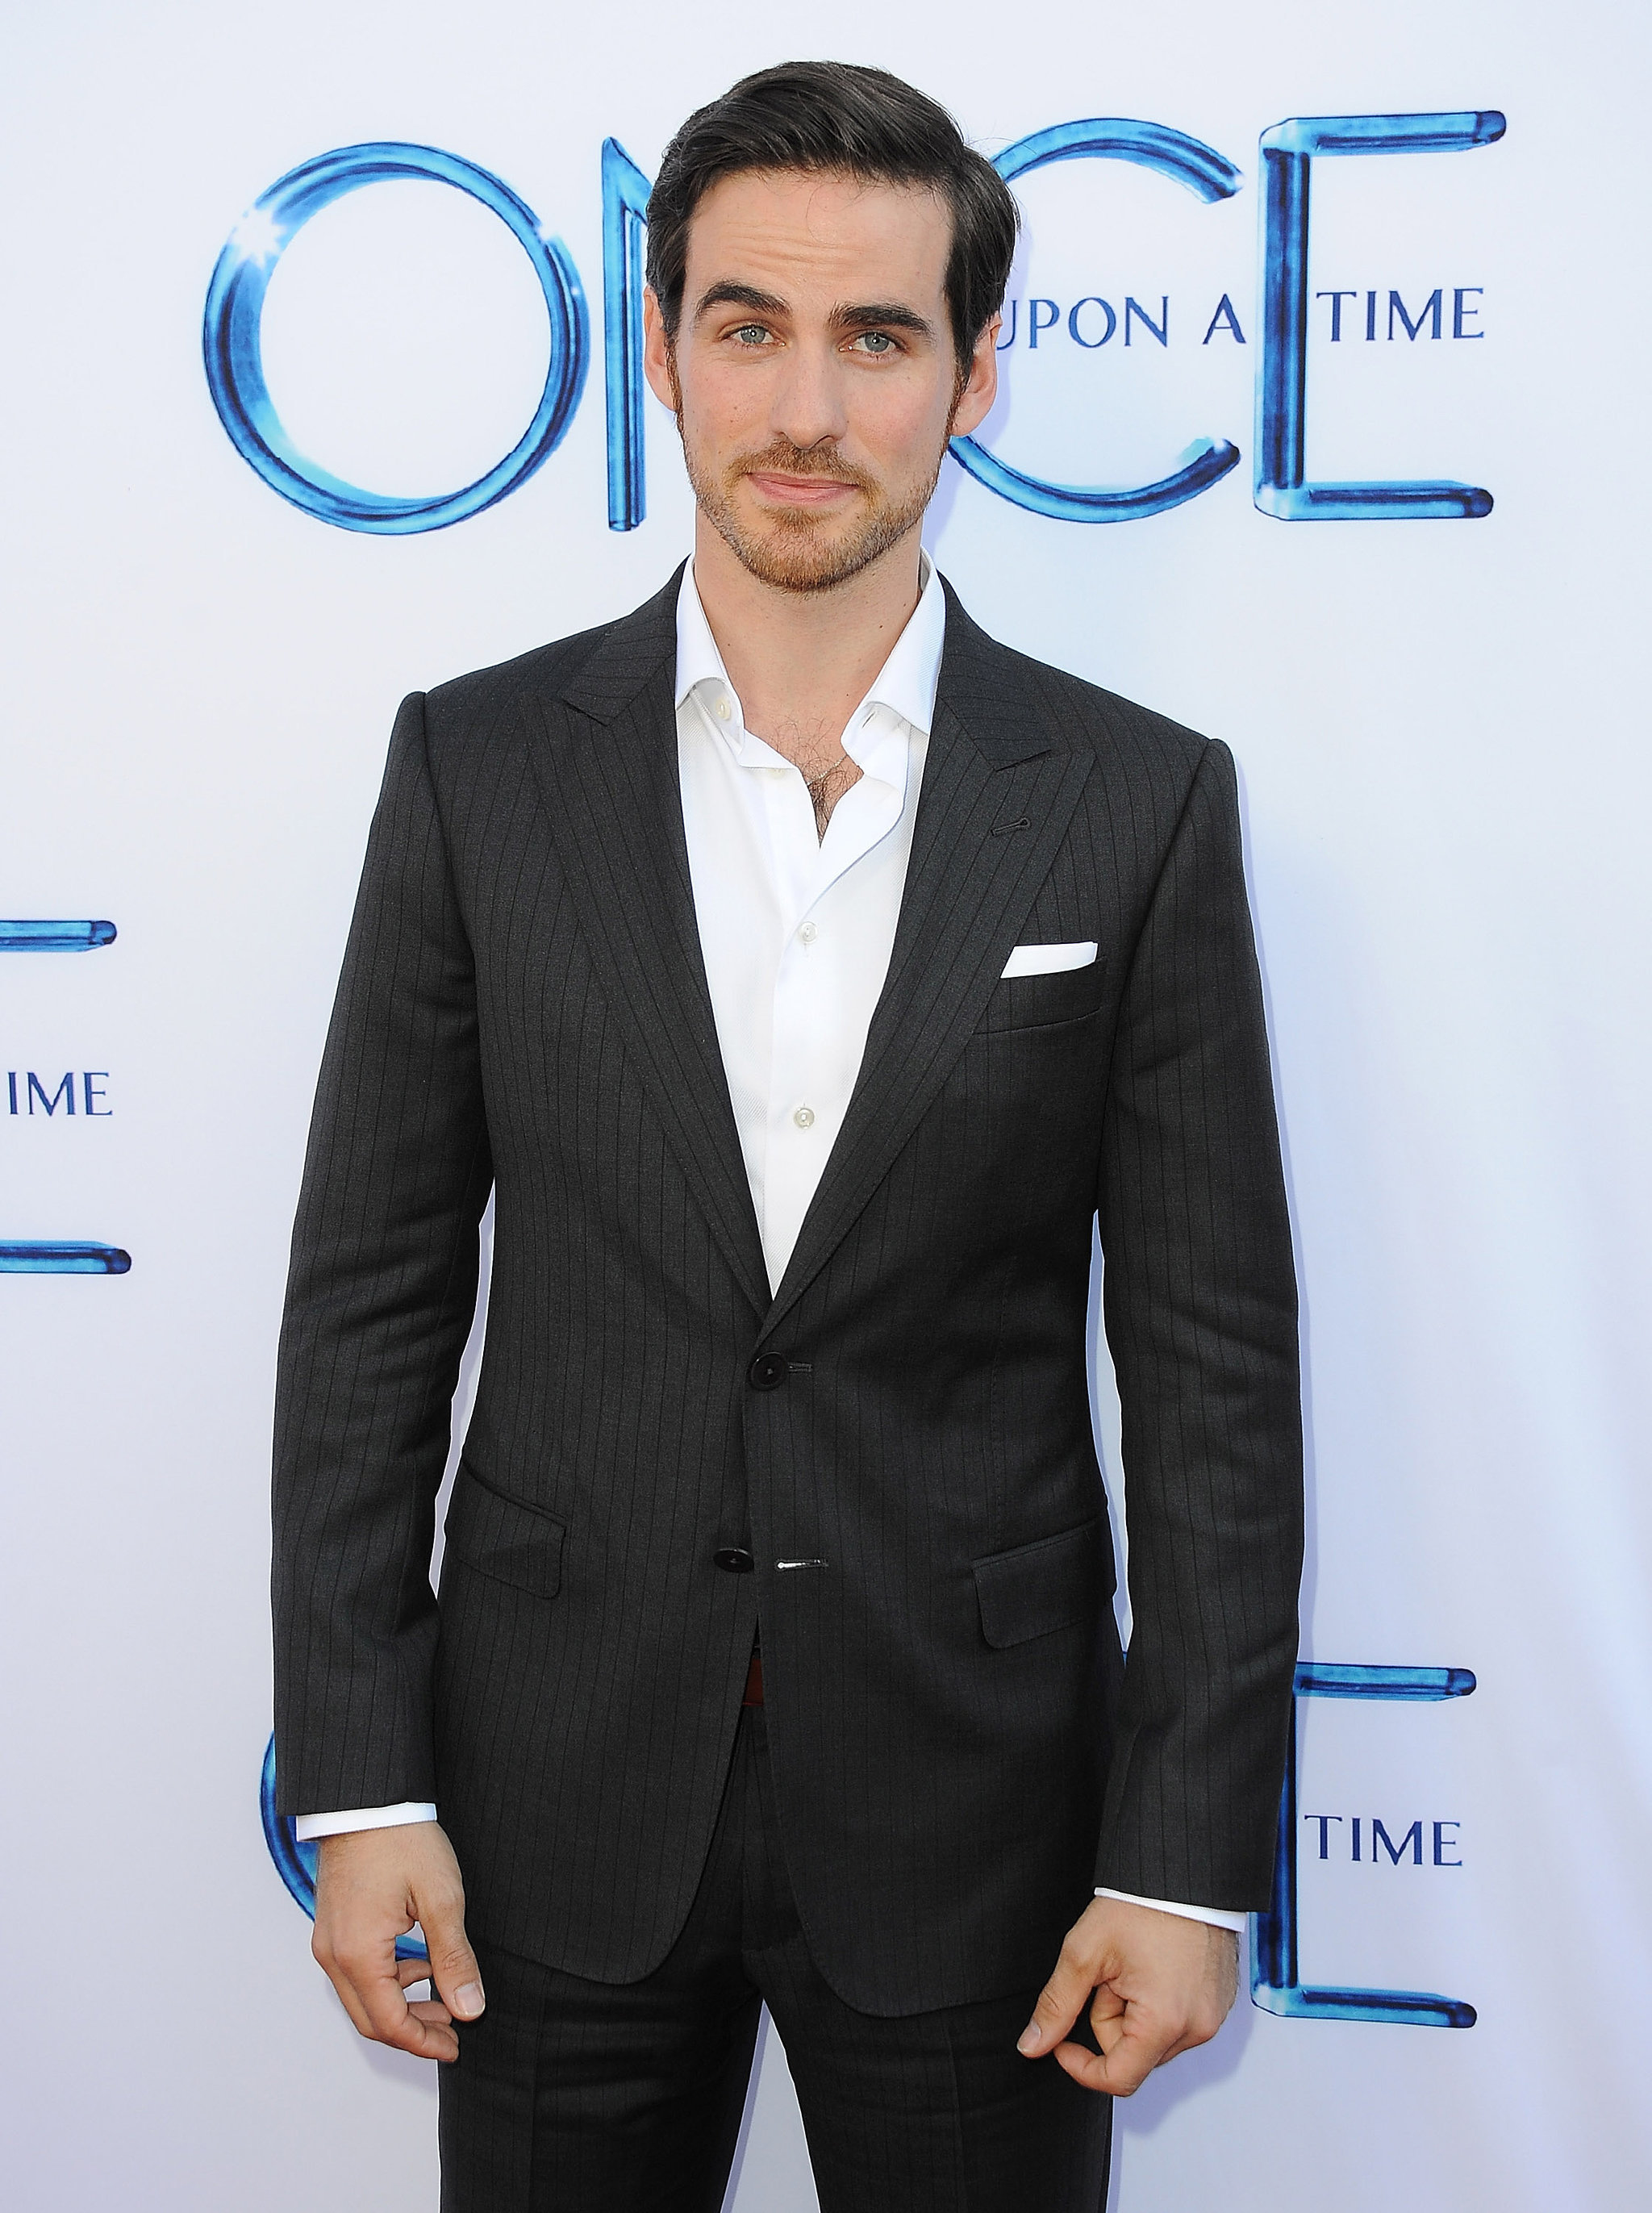 Colin Odonoghue 21 Hot Irish Lads Wed Let Steal Our Pot Of Gold Popsugar Australia Love And Sex 2579